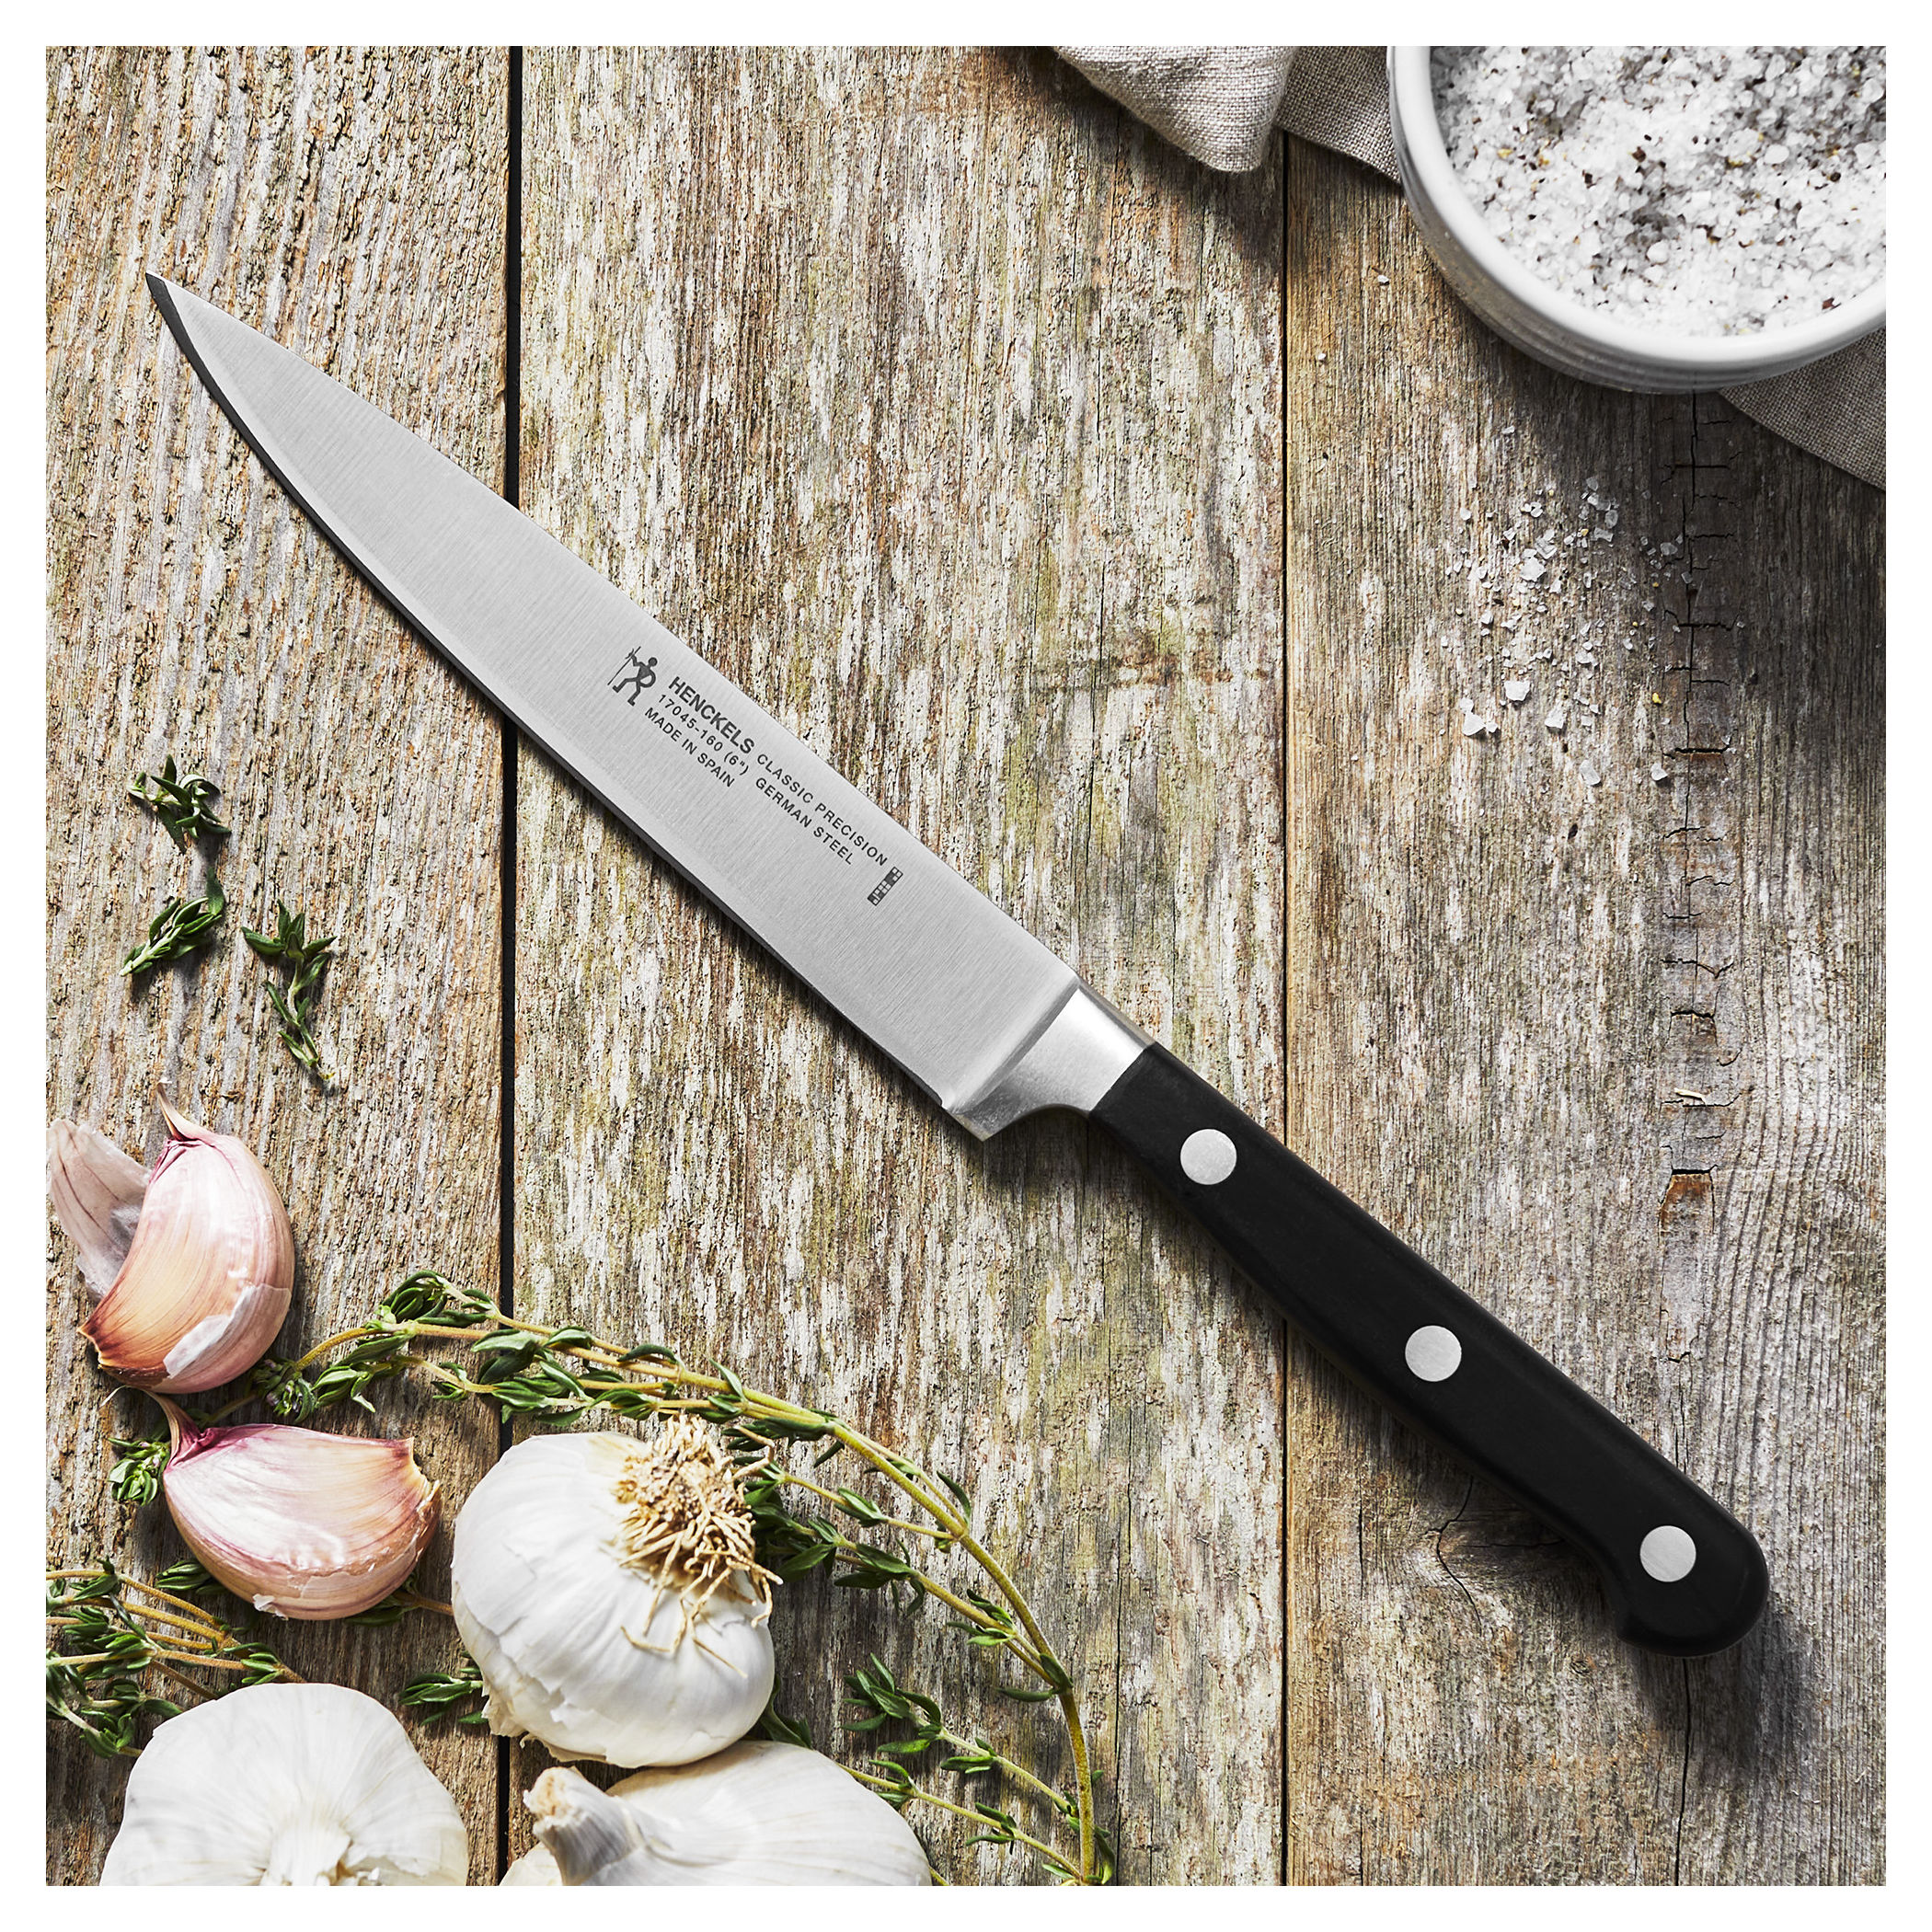 A Henckels Classic Precision 3-Piece Knife Set Is on Sale at Zwilling